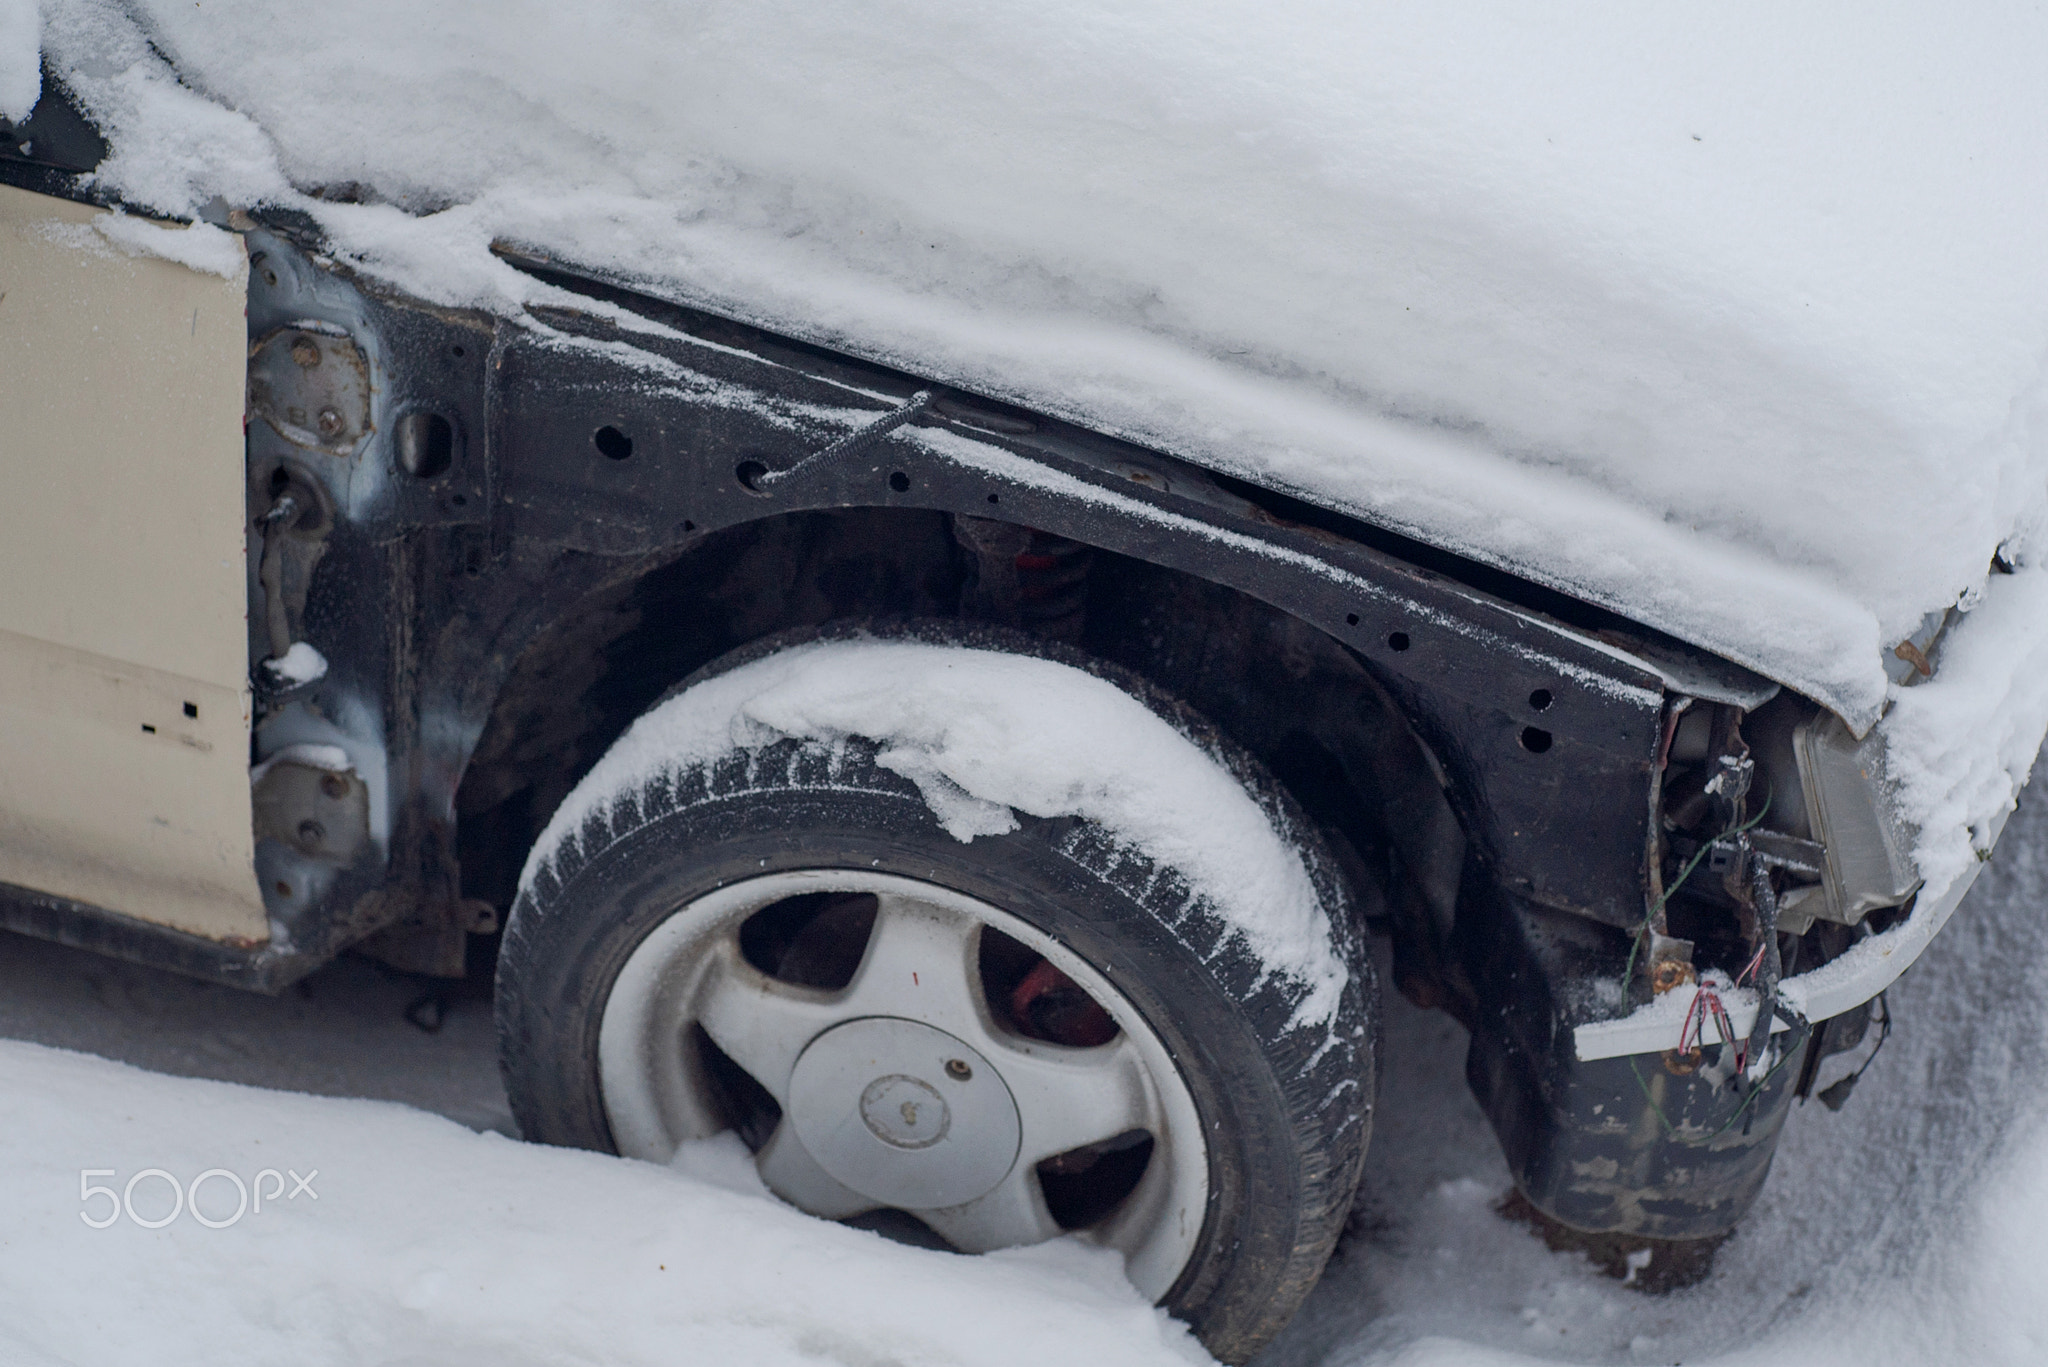 Part of an old disassembled car in the snow.